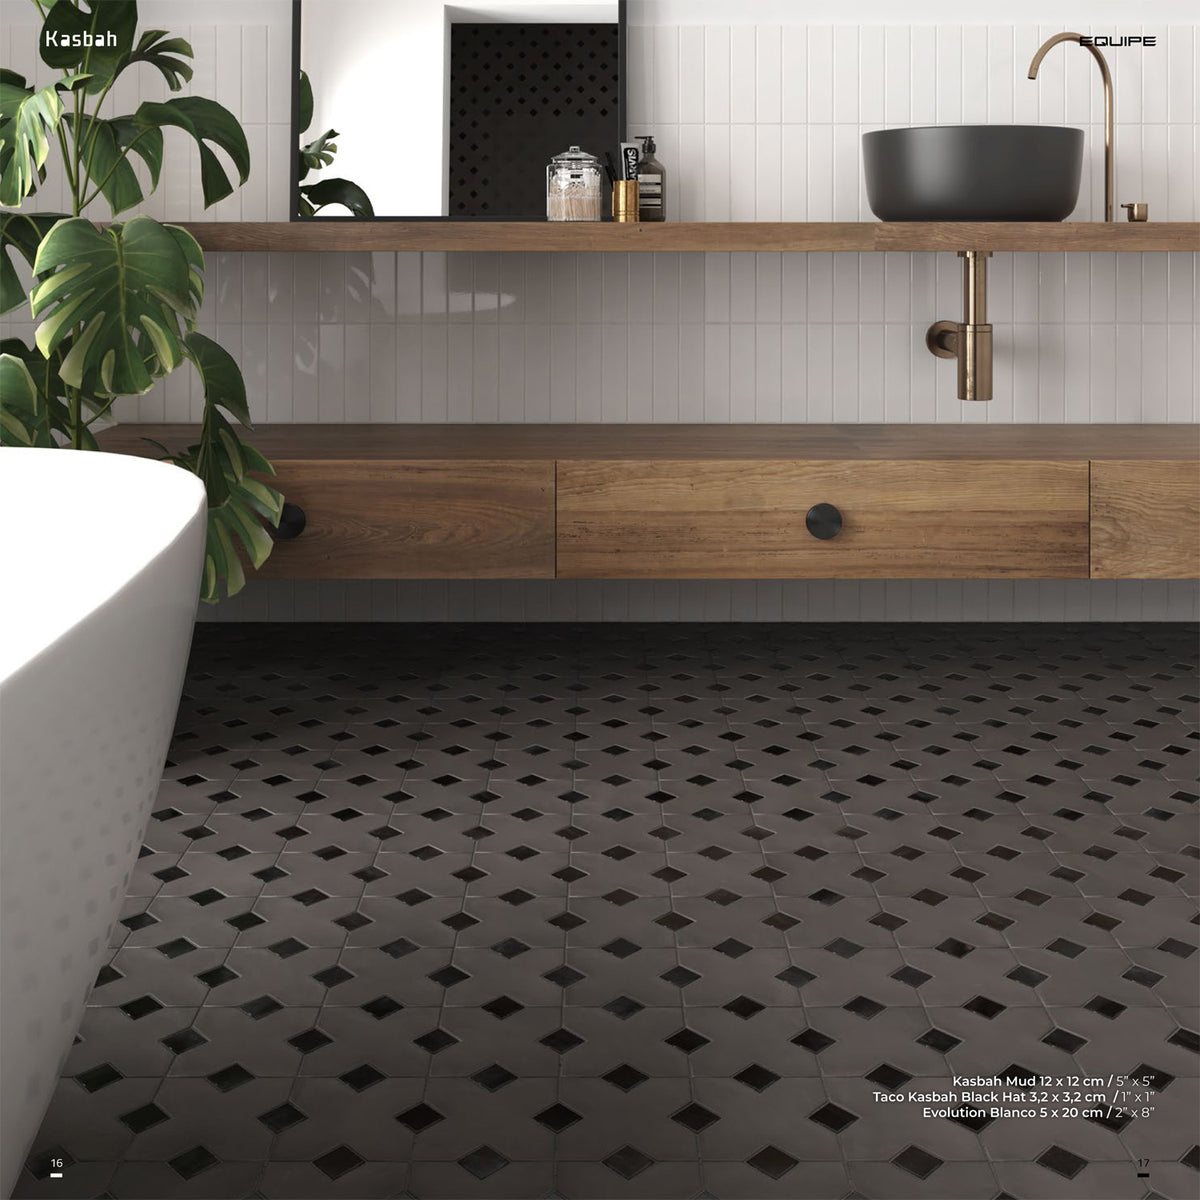 Equipe - Kasbah Collection - 1 in. x 1 in. Porcelain Tile - Black Hat Gloss Installed